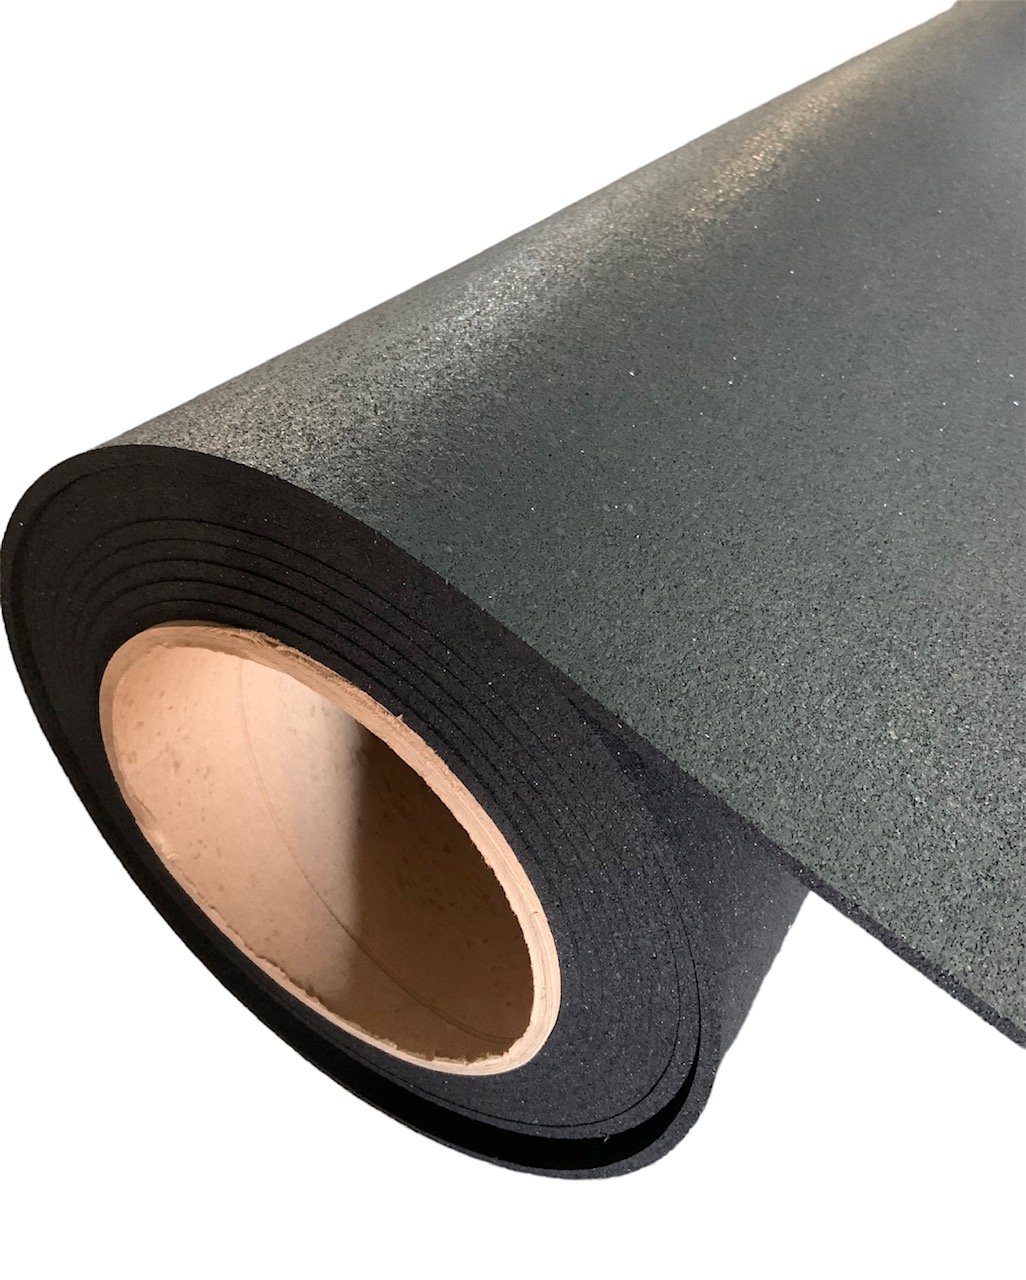 COMMERCIAL & INDUSTRIAL RUBBER ROLL 4x25 - MGR Canada